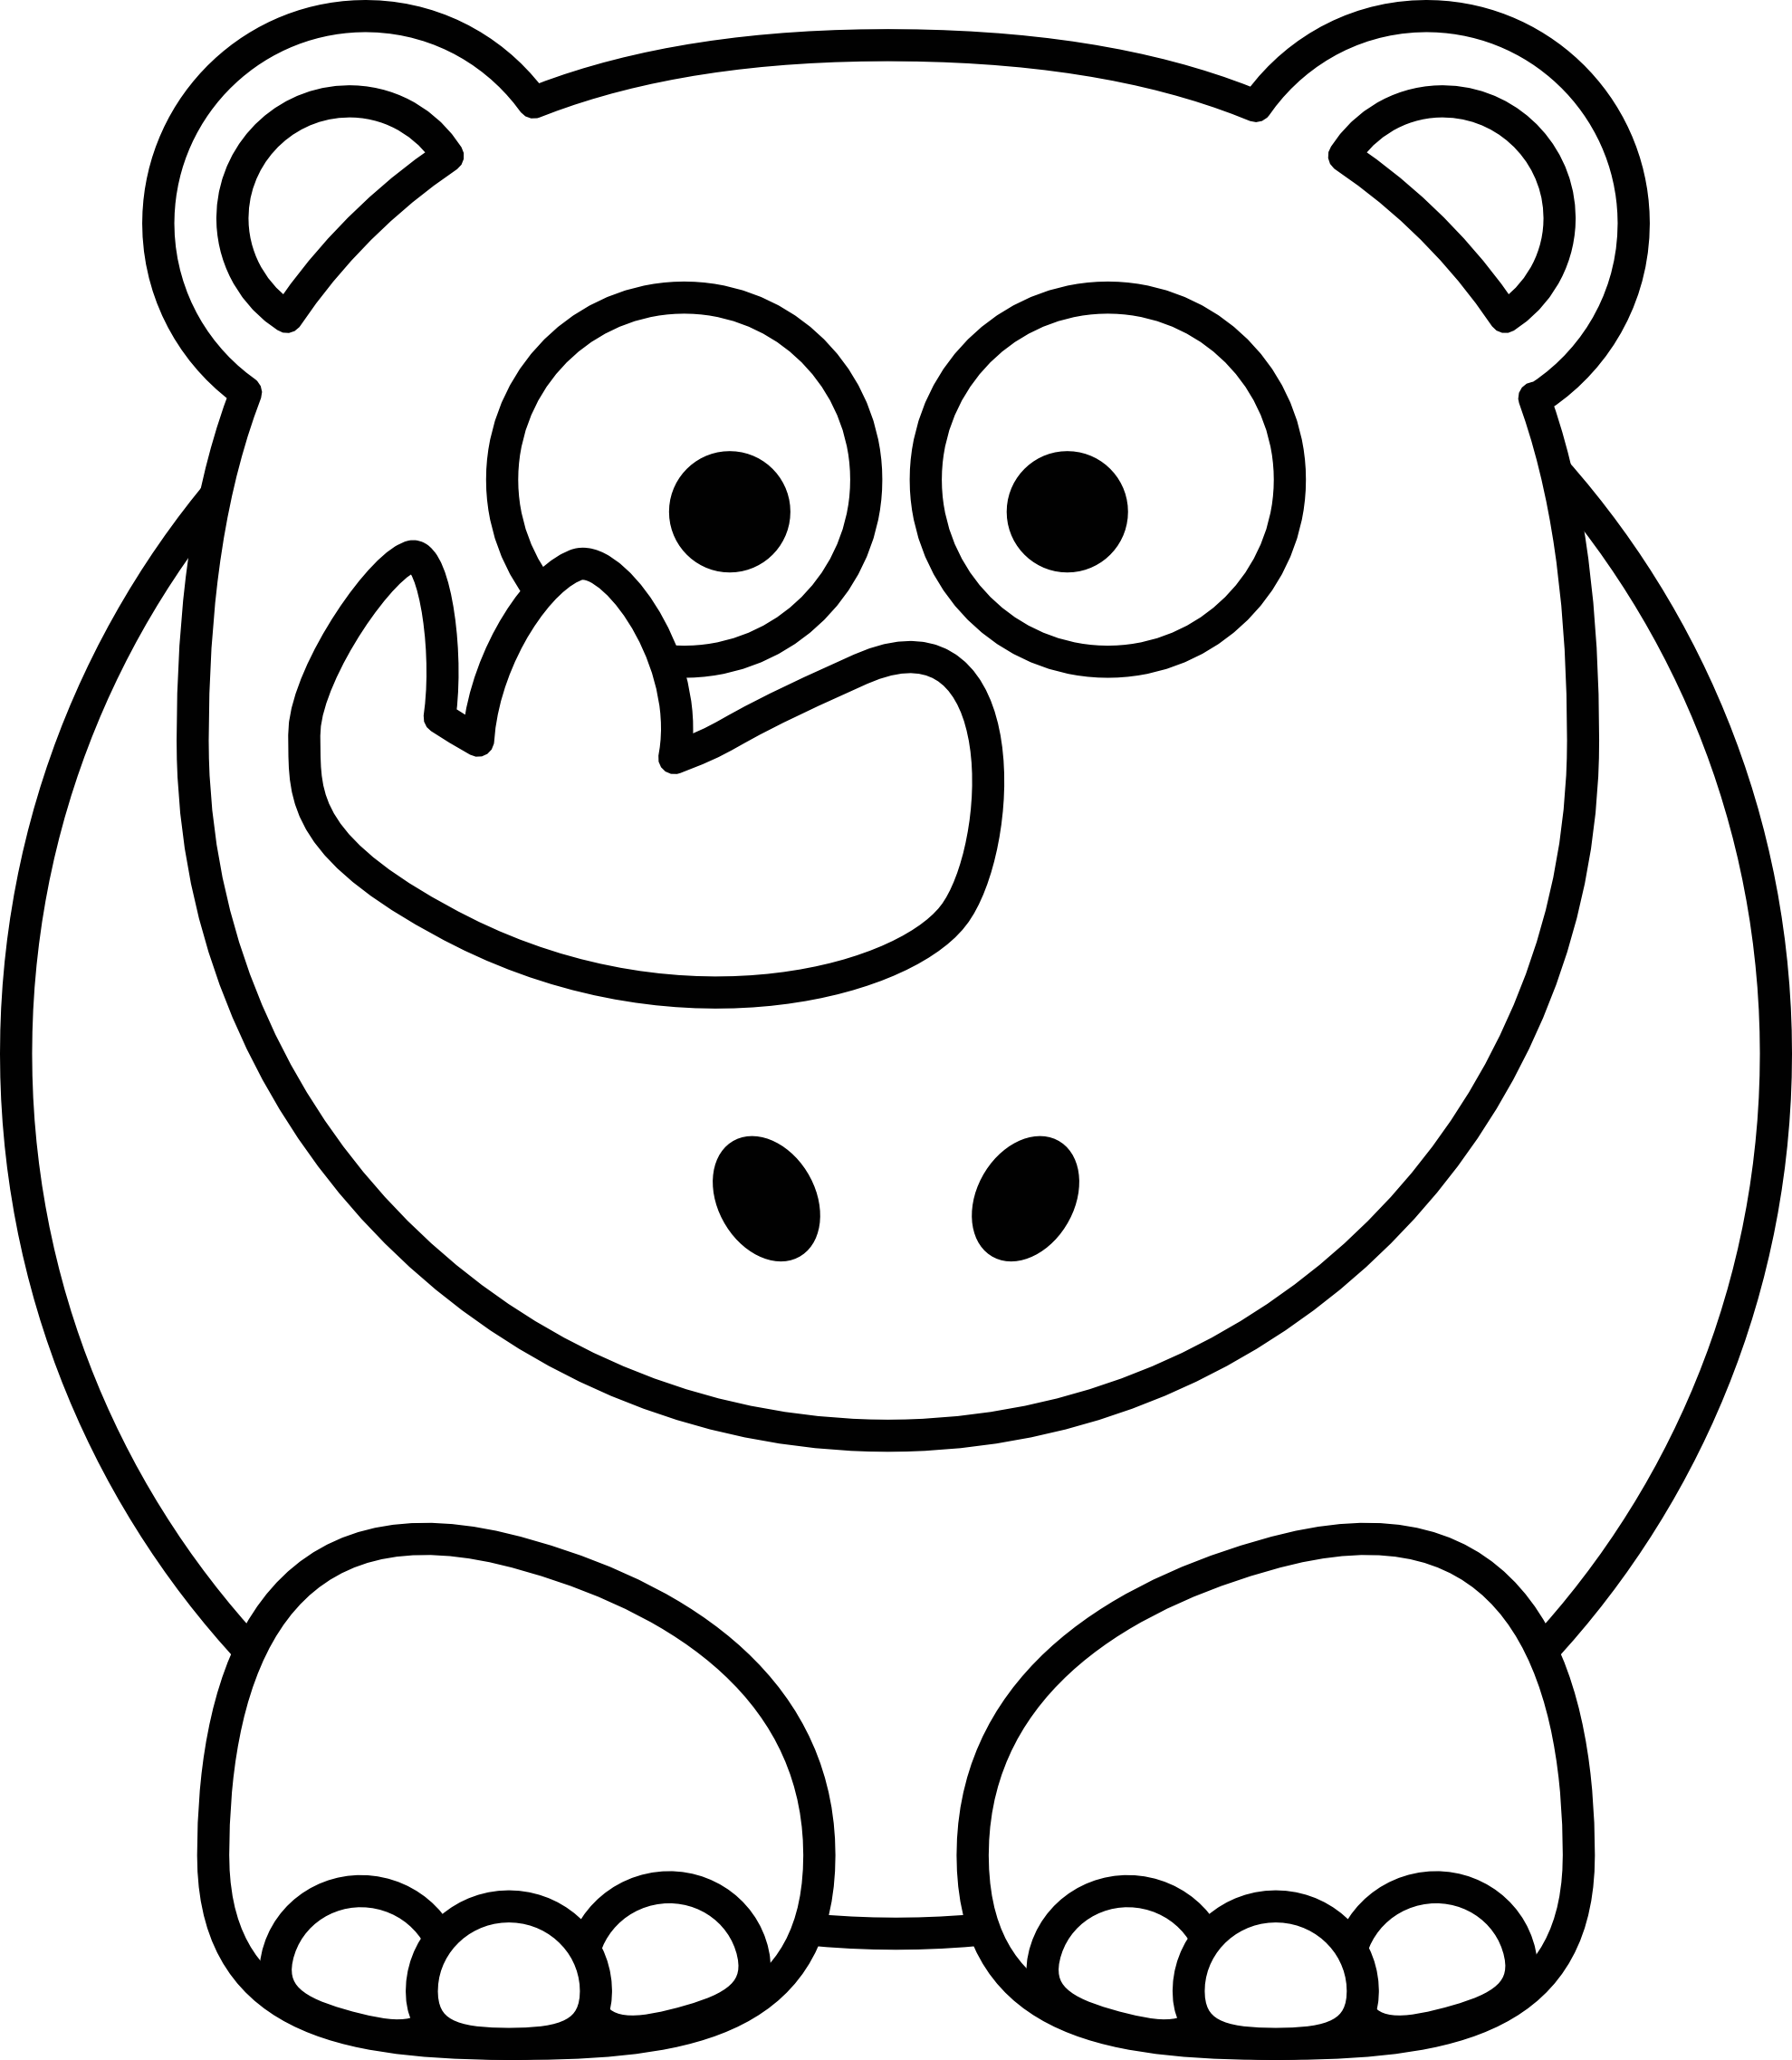 Black and white clipart of animals